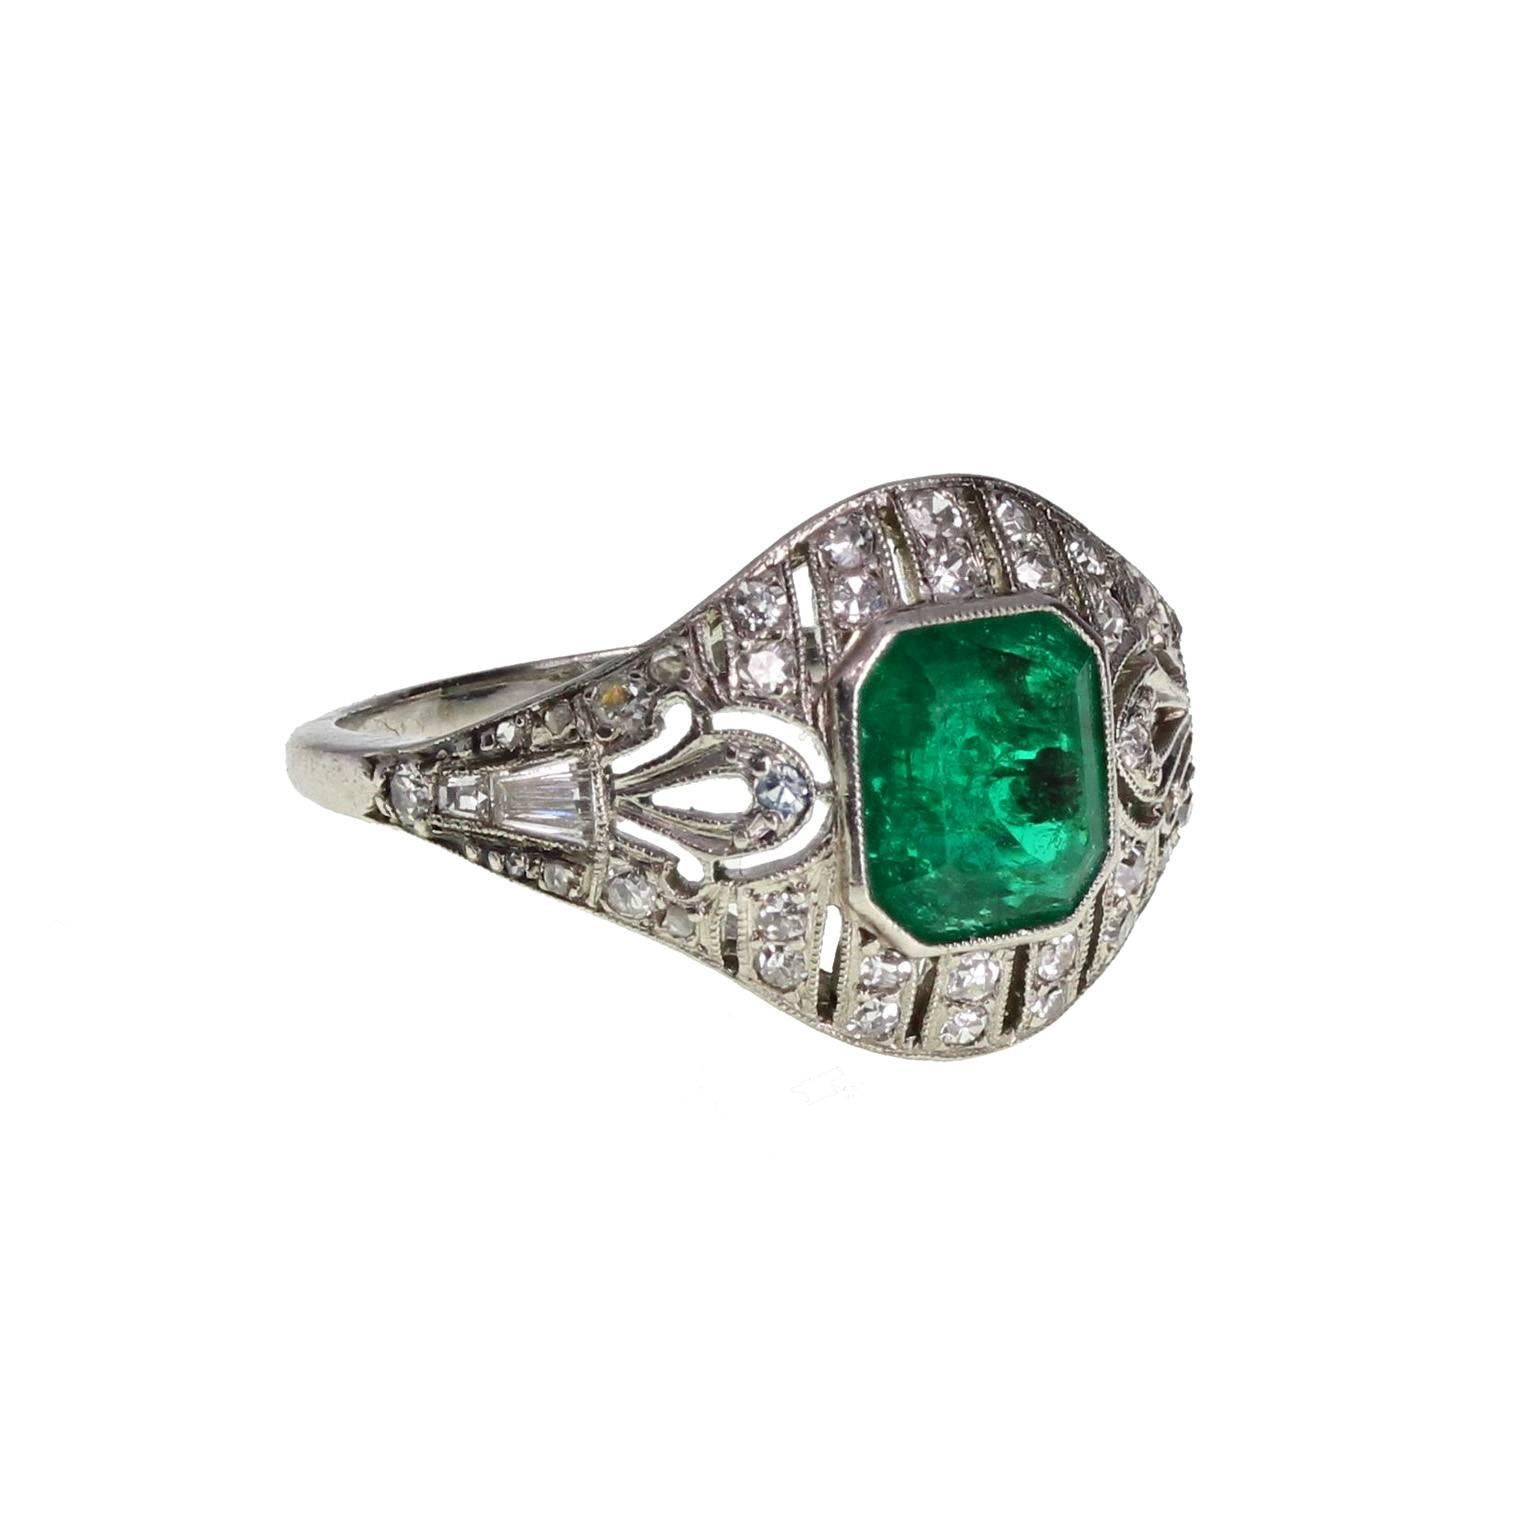 

A fine and impressive example of early 20th century style. This wonderful pierced platinum ring is decorated with single-cut and baguette-cut diamonds and detailed with mille-grain edging. A single deep-green Colombian emerald-cut emerald of